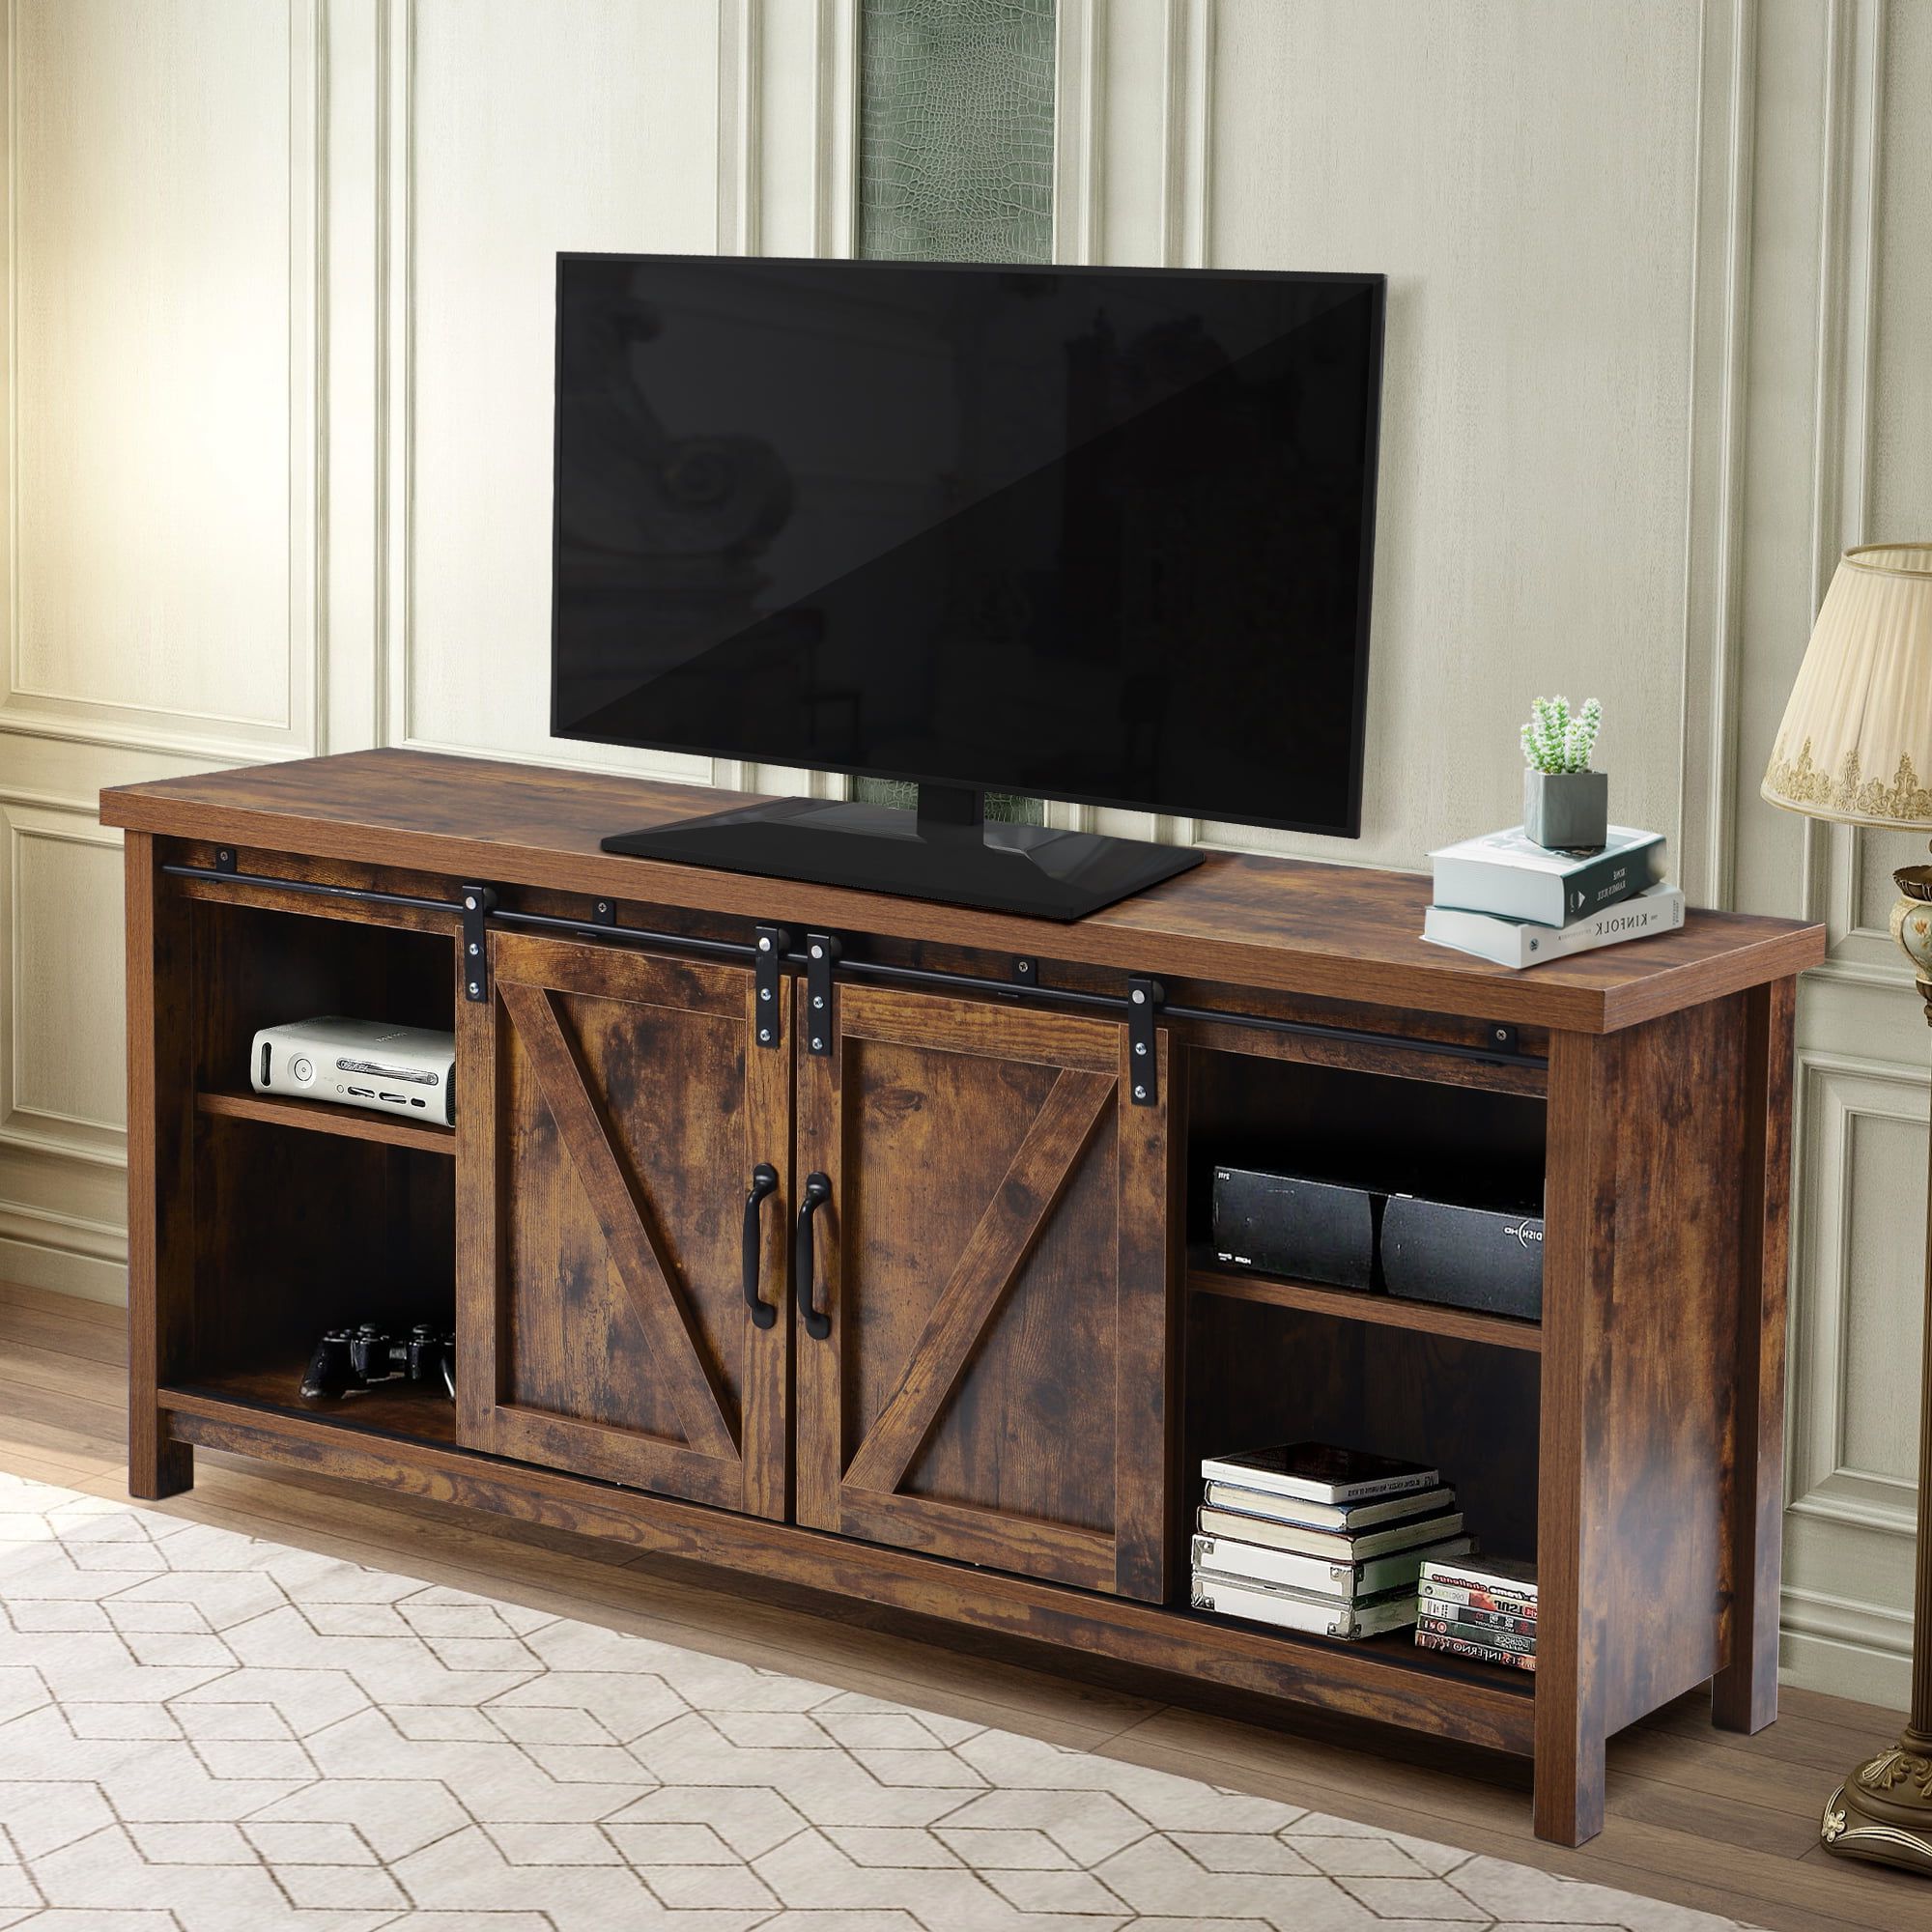 Buy Farmhouse 52'' Tv Stands With Adjustable Leg, Segmart Traditional For Famous 110" Tvs Wood Tv Cabinet With Drawers (View 9 of 15)